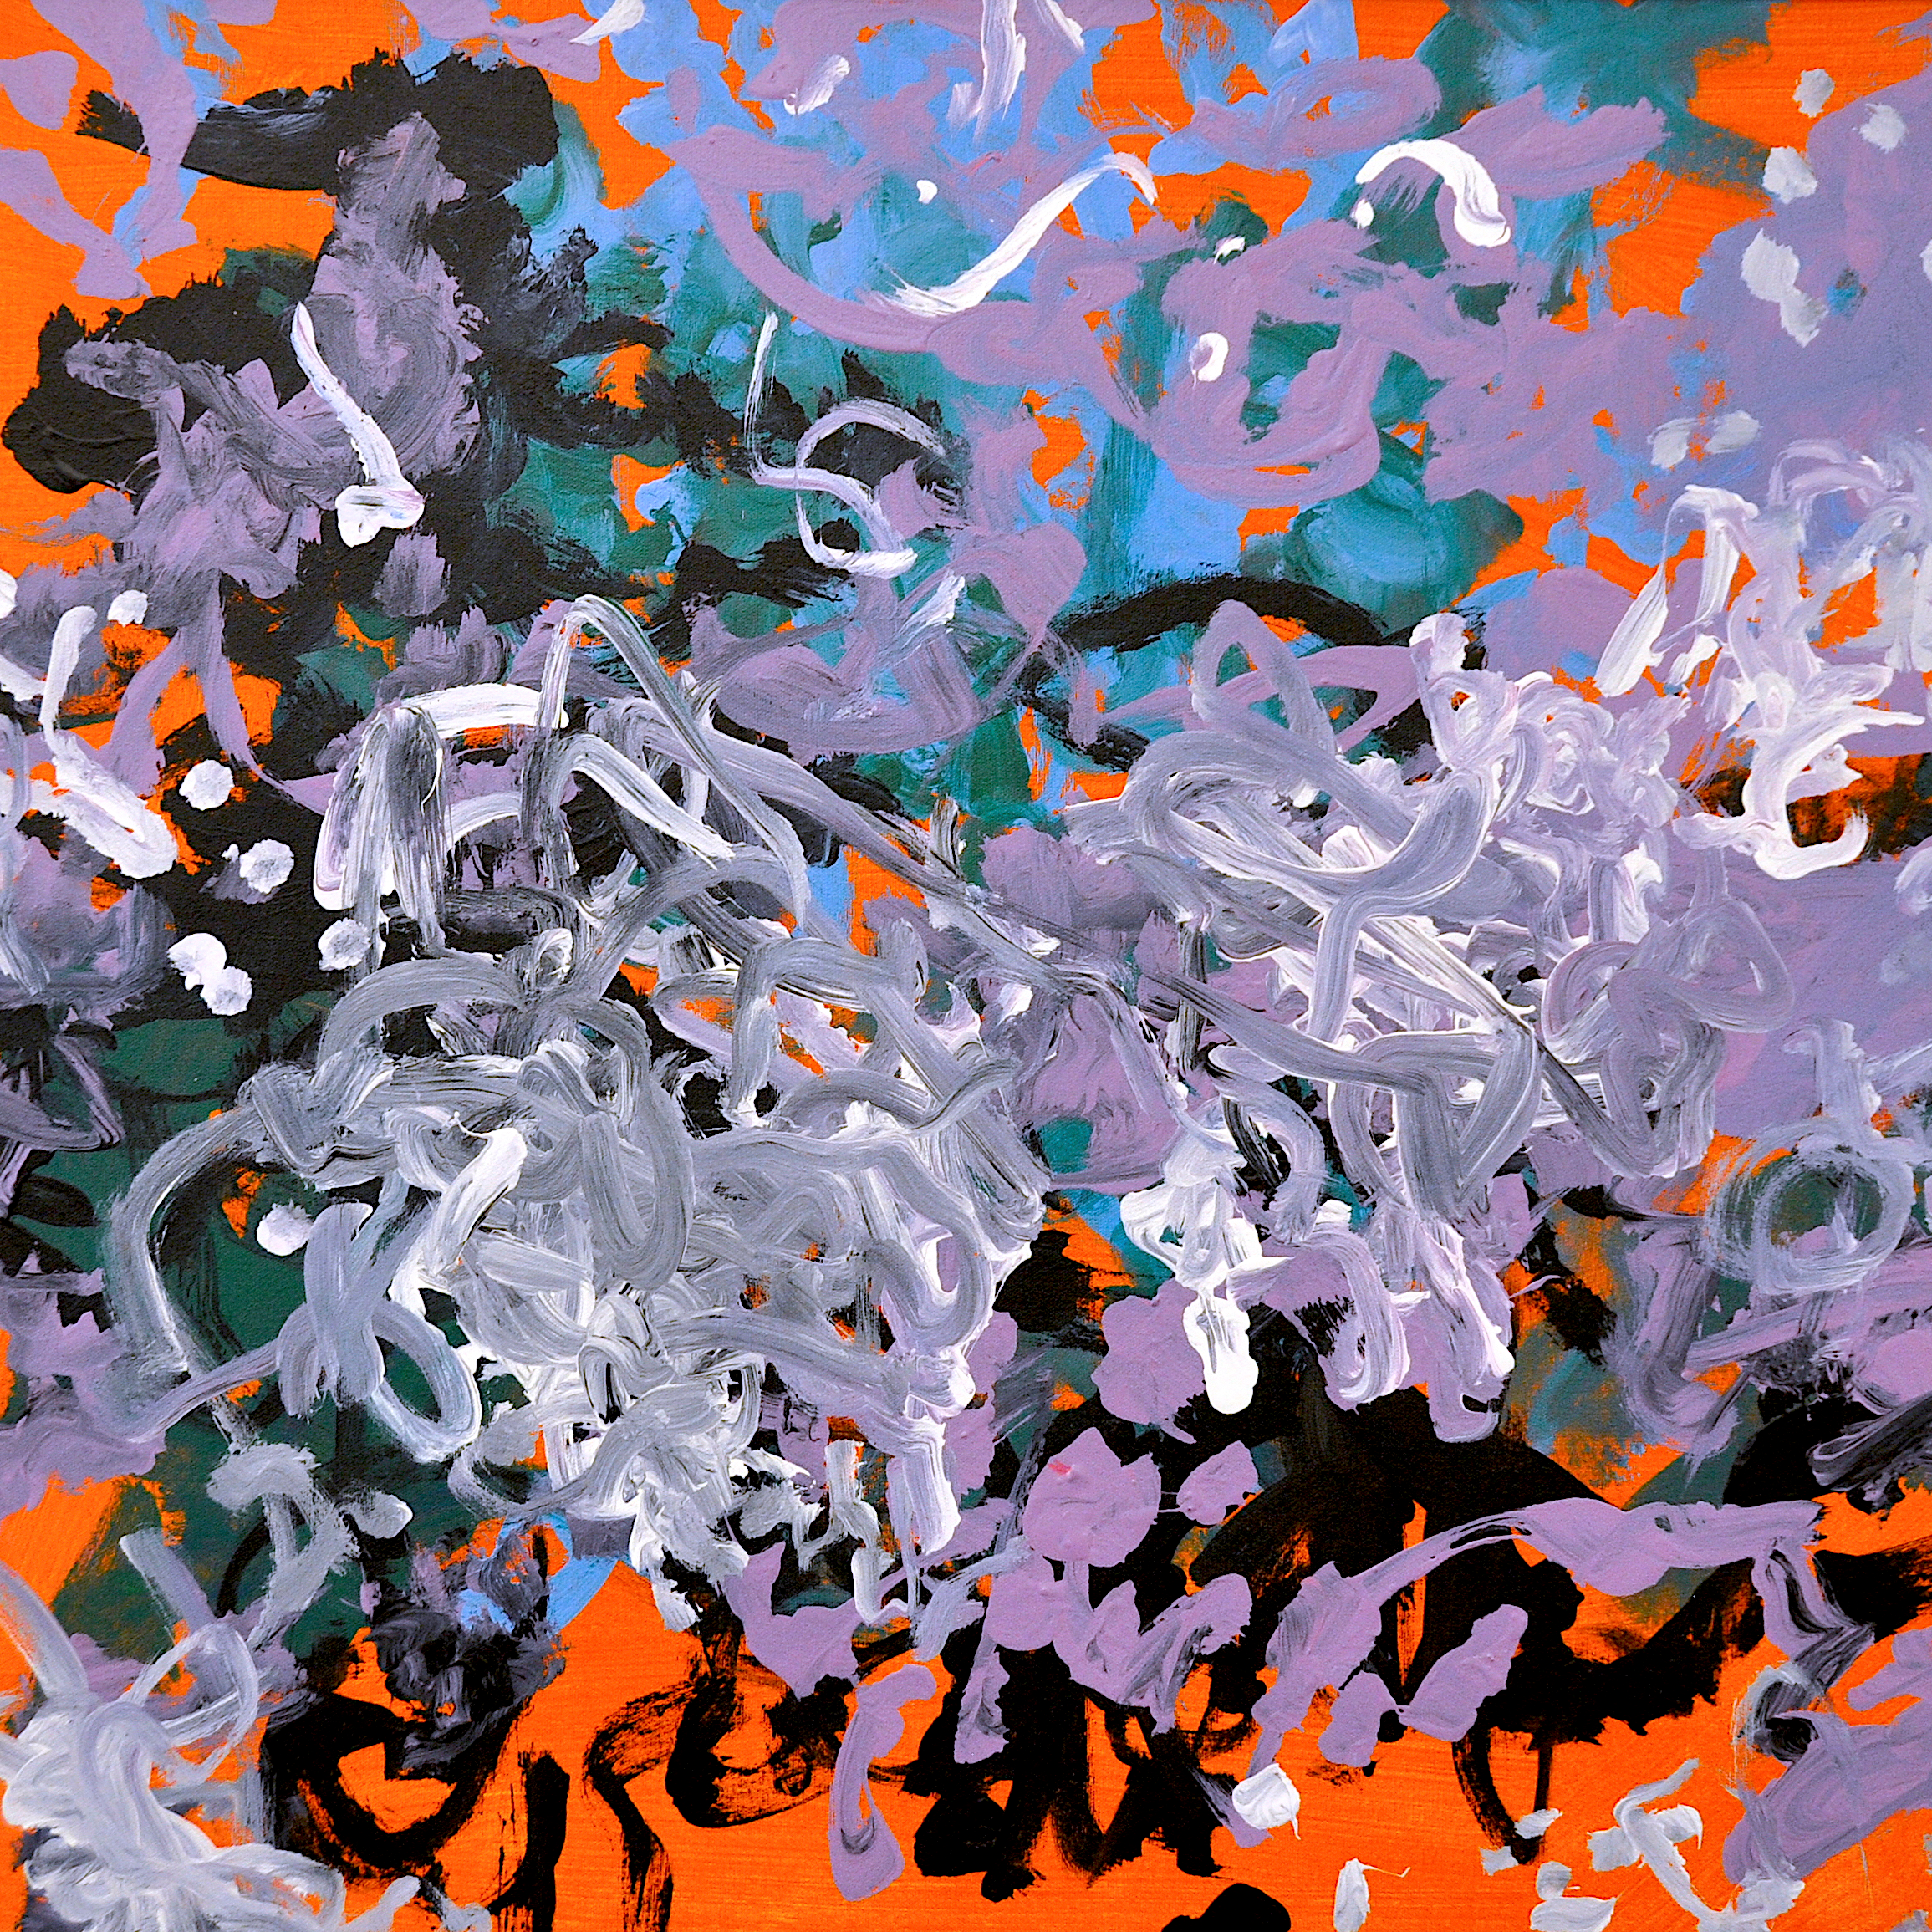 Abstract painting with a flurry of layered black, purple, then white brush strokes over a solid orange background.